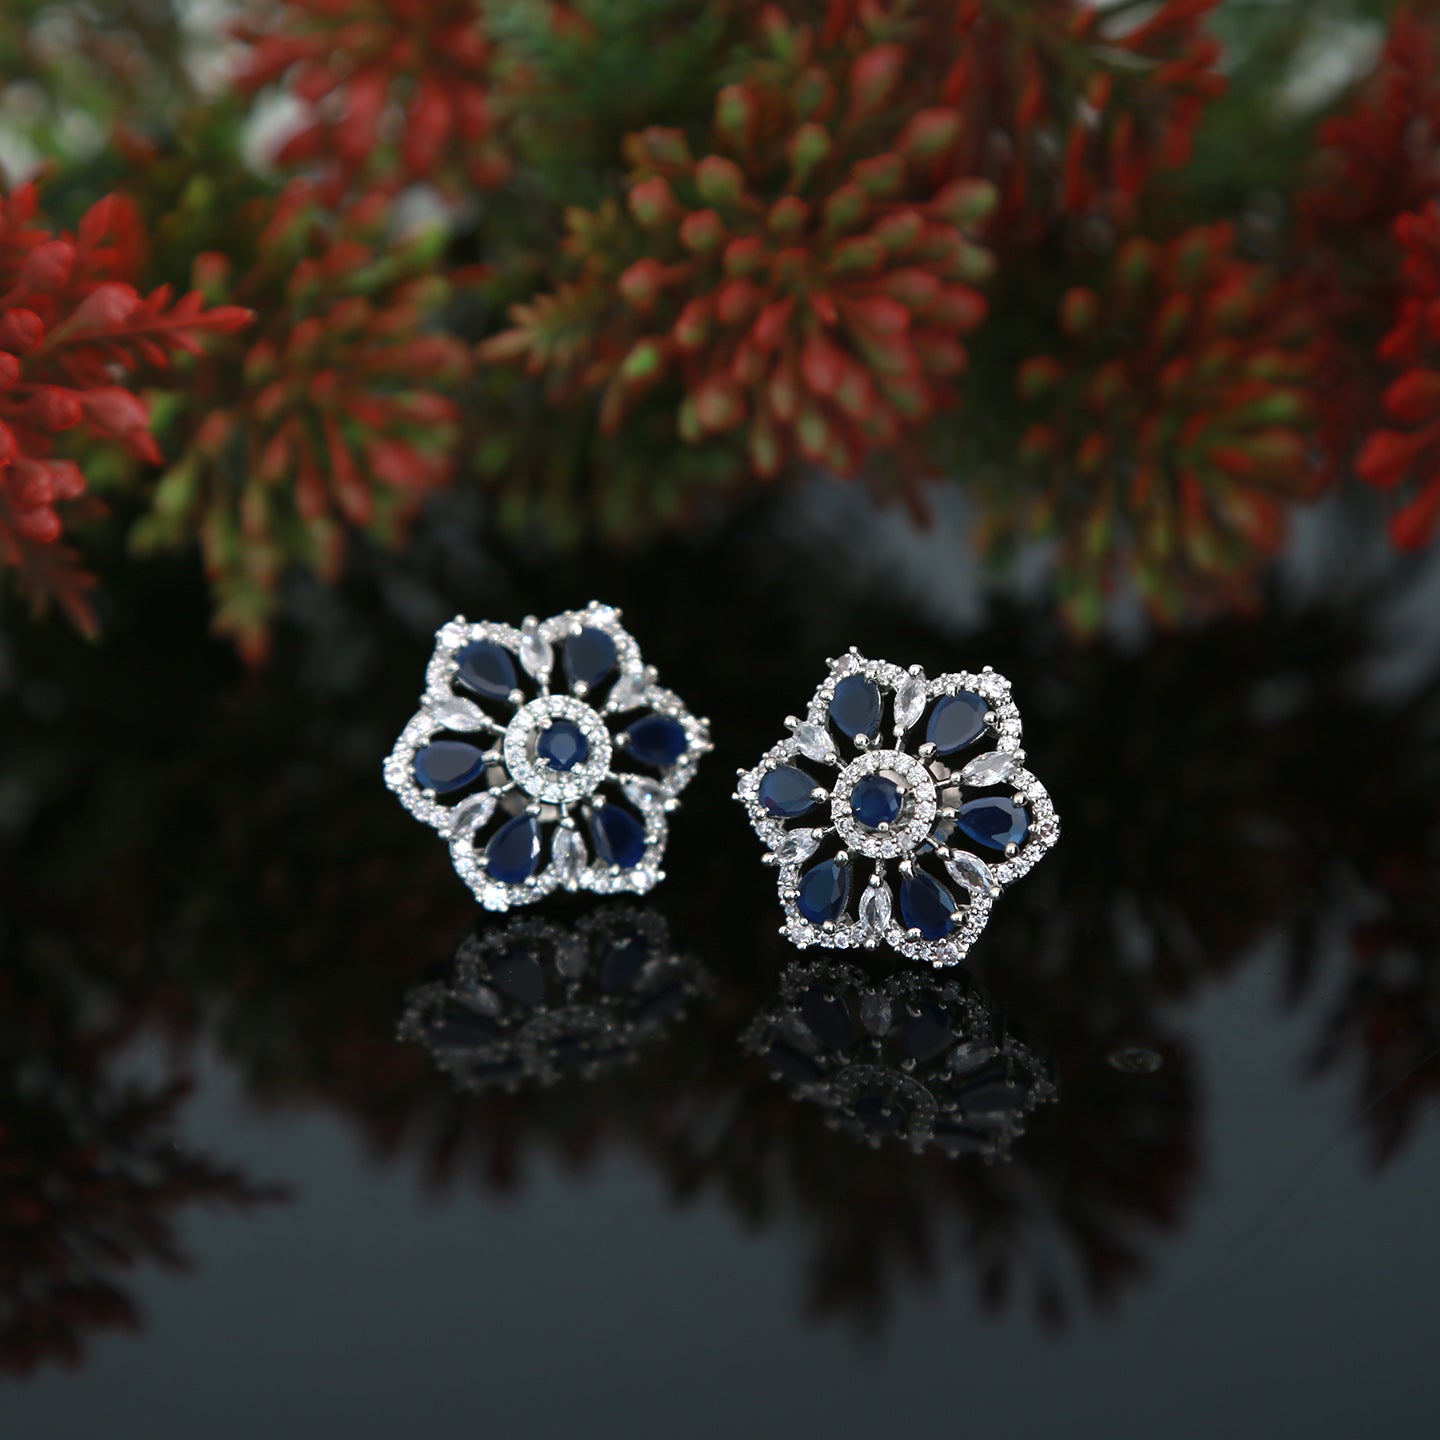 Big Size CZ Silver Plated American Diamond flower shape stud earrings | Color stone Stud Earrings | Rhodium Plated Silver tops |Gift for her